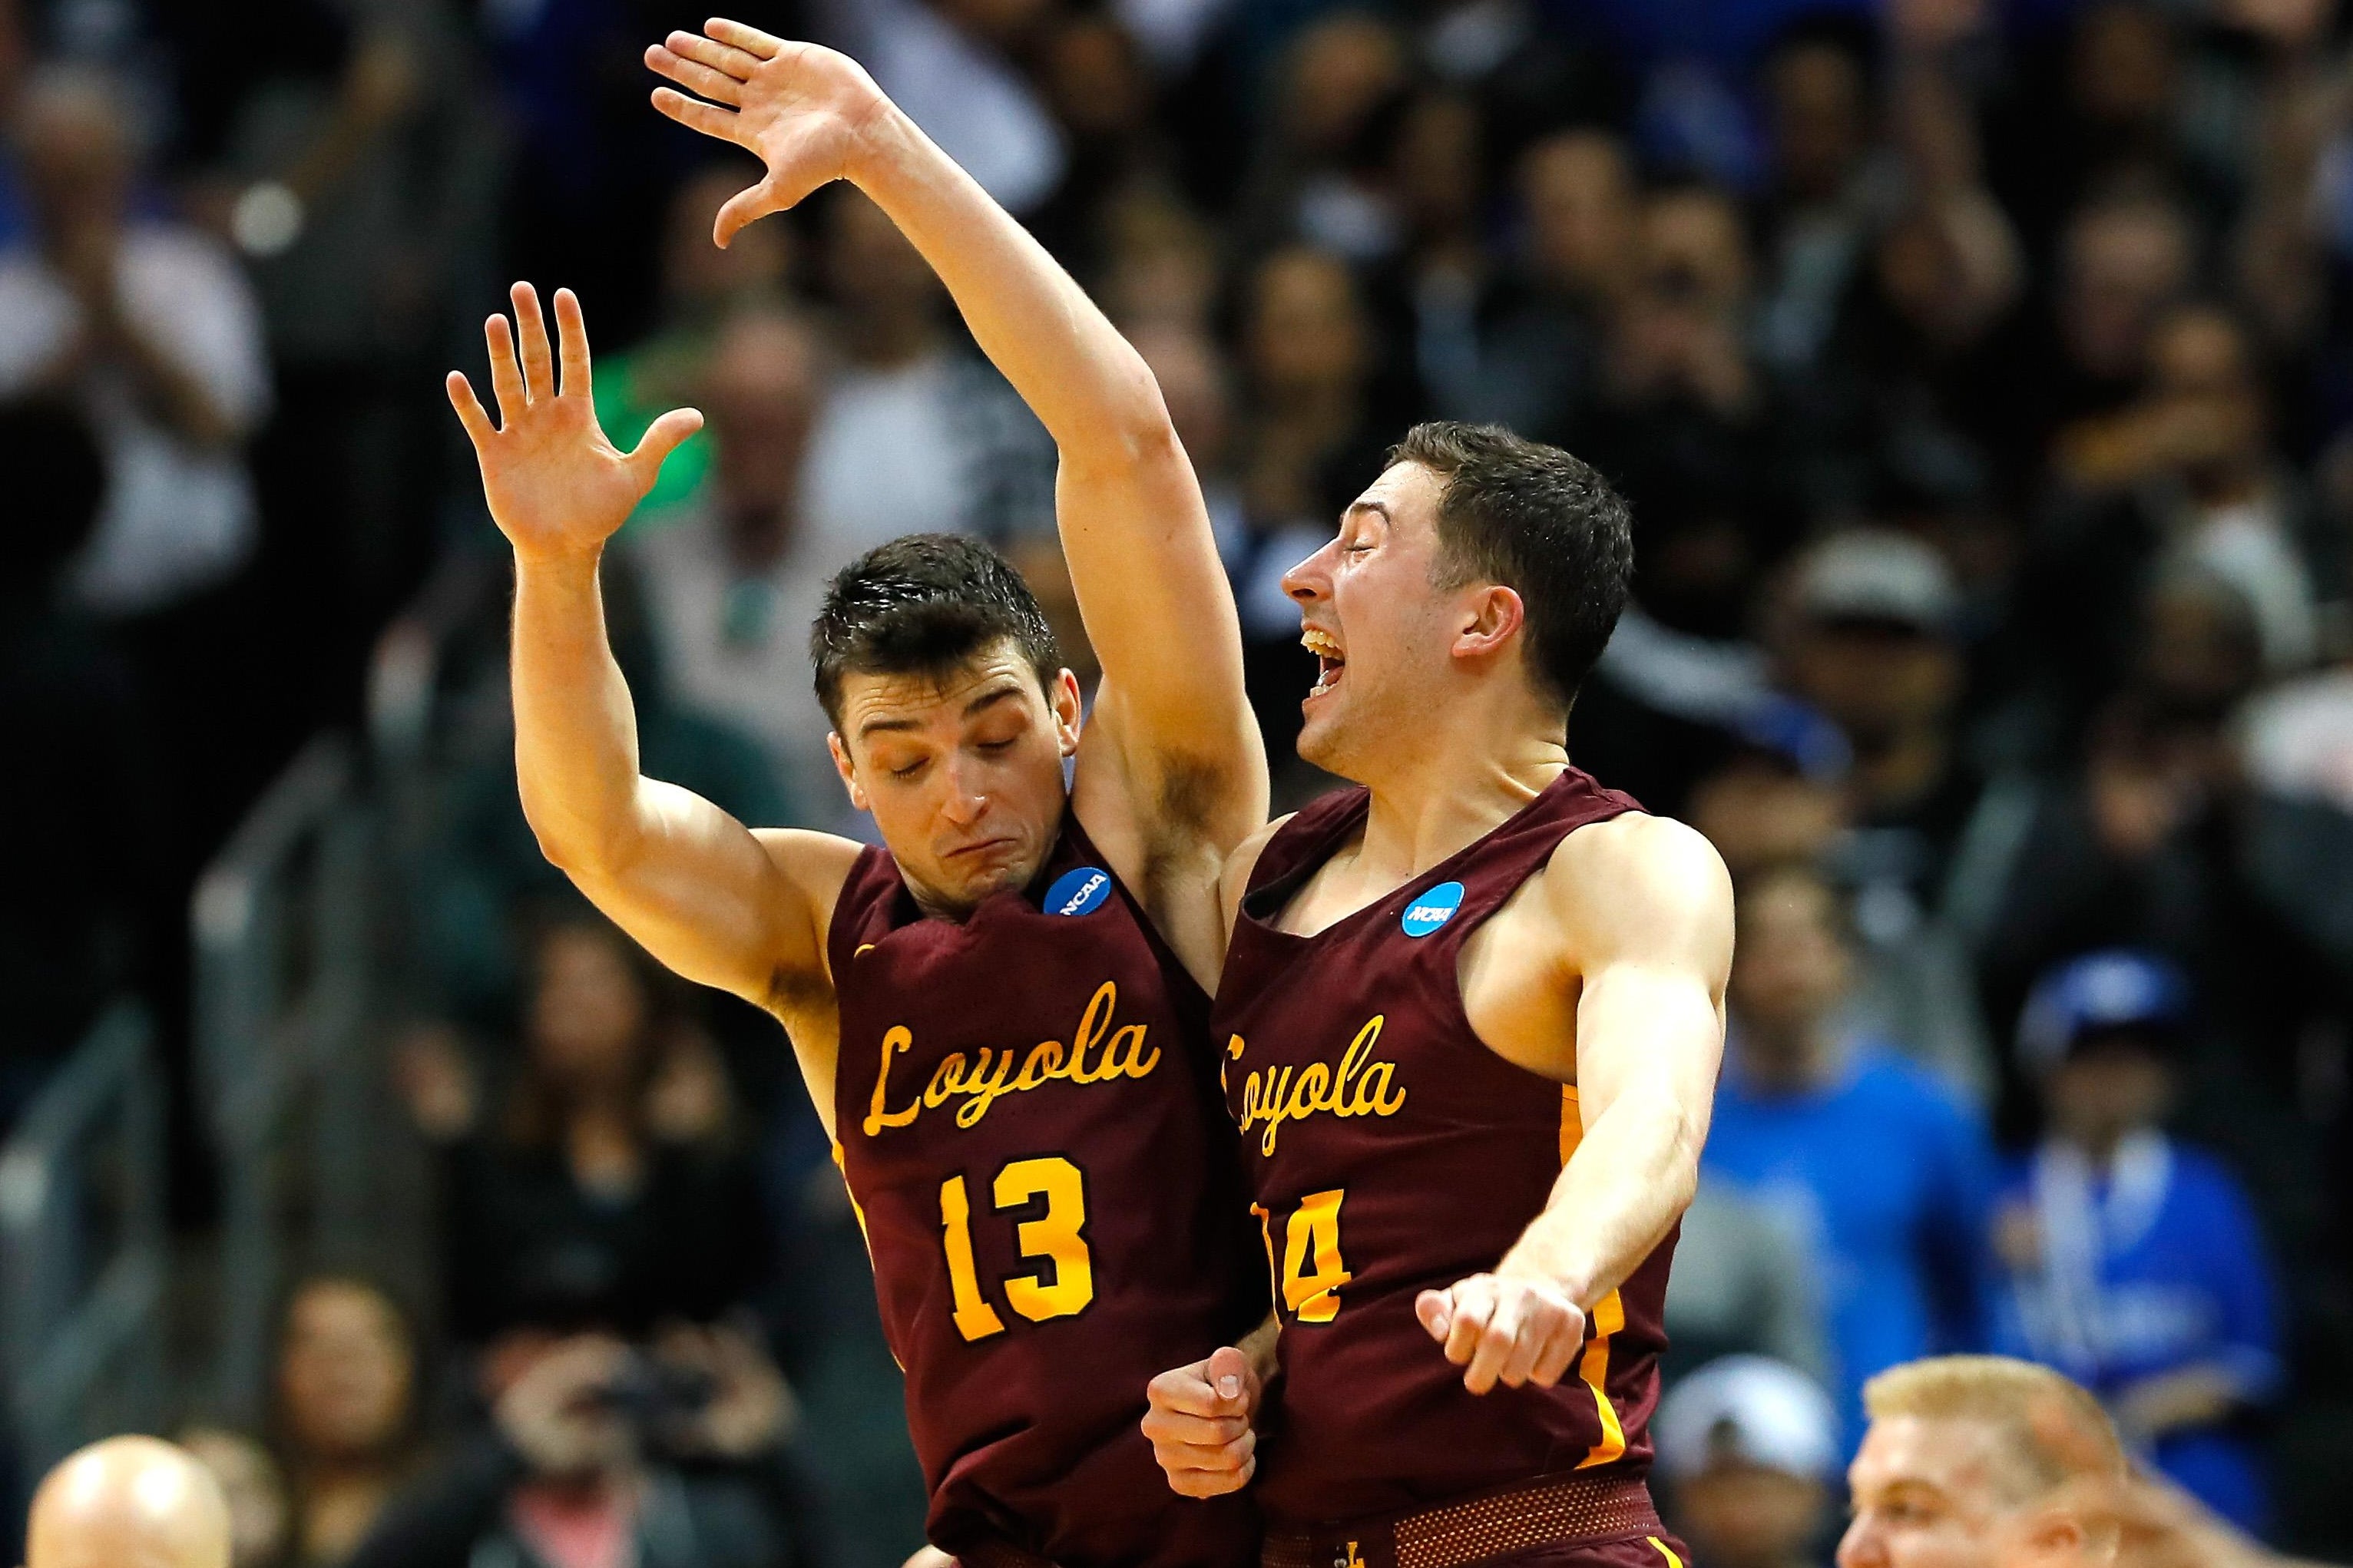 ATLANTA, GA - MARCH 22: Clayton Custer #13 and Ben Richardson #14 of the Loyola Ramblers celebrate after defeating the Nevada Wolf Pack during the 2018 NCAA Men's Basketball Tournament South Regional at Philips Arena on March 22, 2018 in Atlanta, Georgia.  (Photo by Kevin C. Cox/Getty Images)